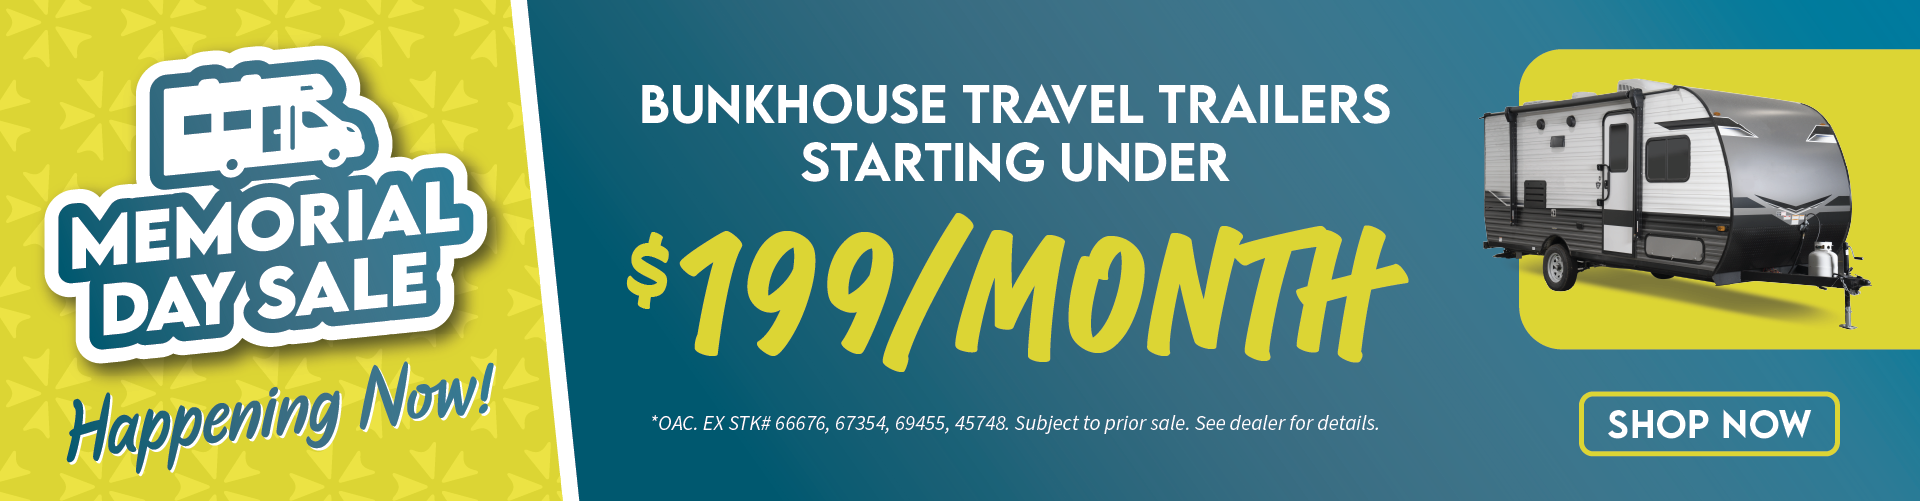 Memorial Day Sale - Happening Now - Bunkhouses starting under $199 per month OAC